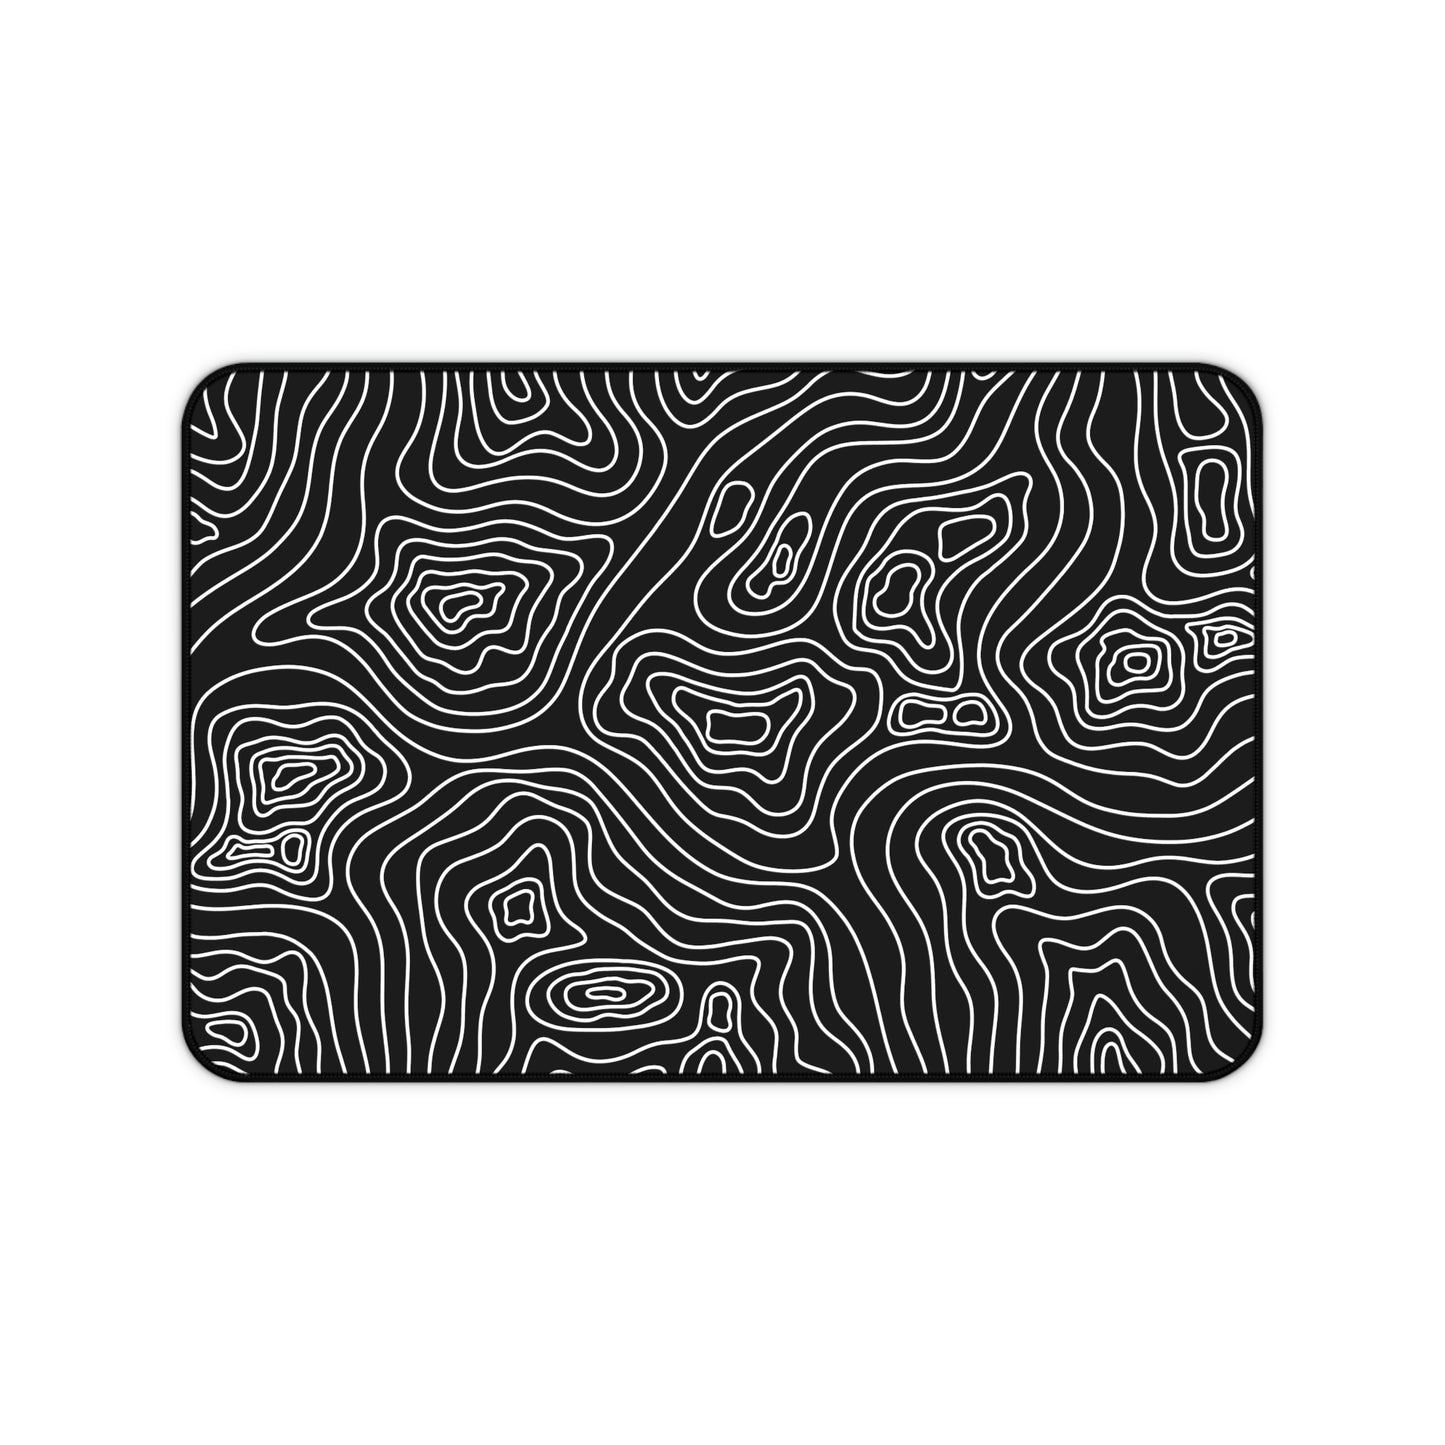 A 12" x 18" black desk mat with white topographic lines.